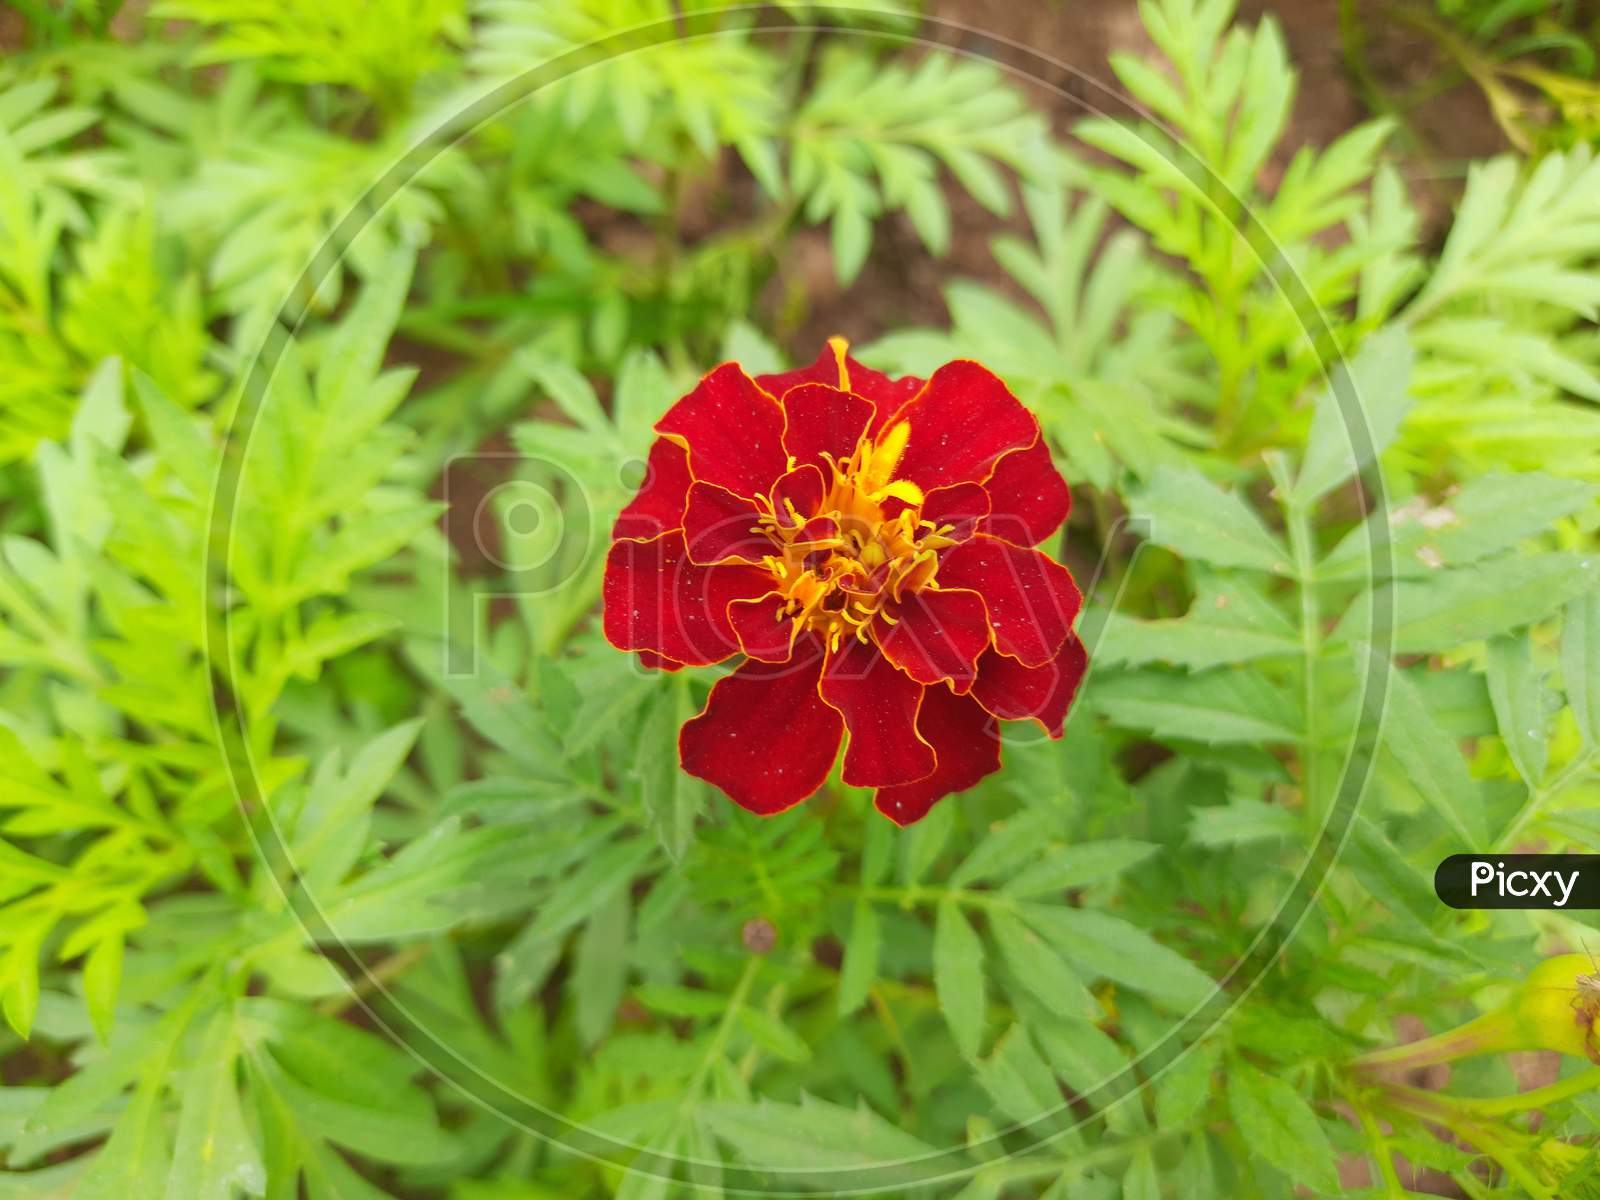 The French marigold flower.